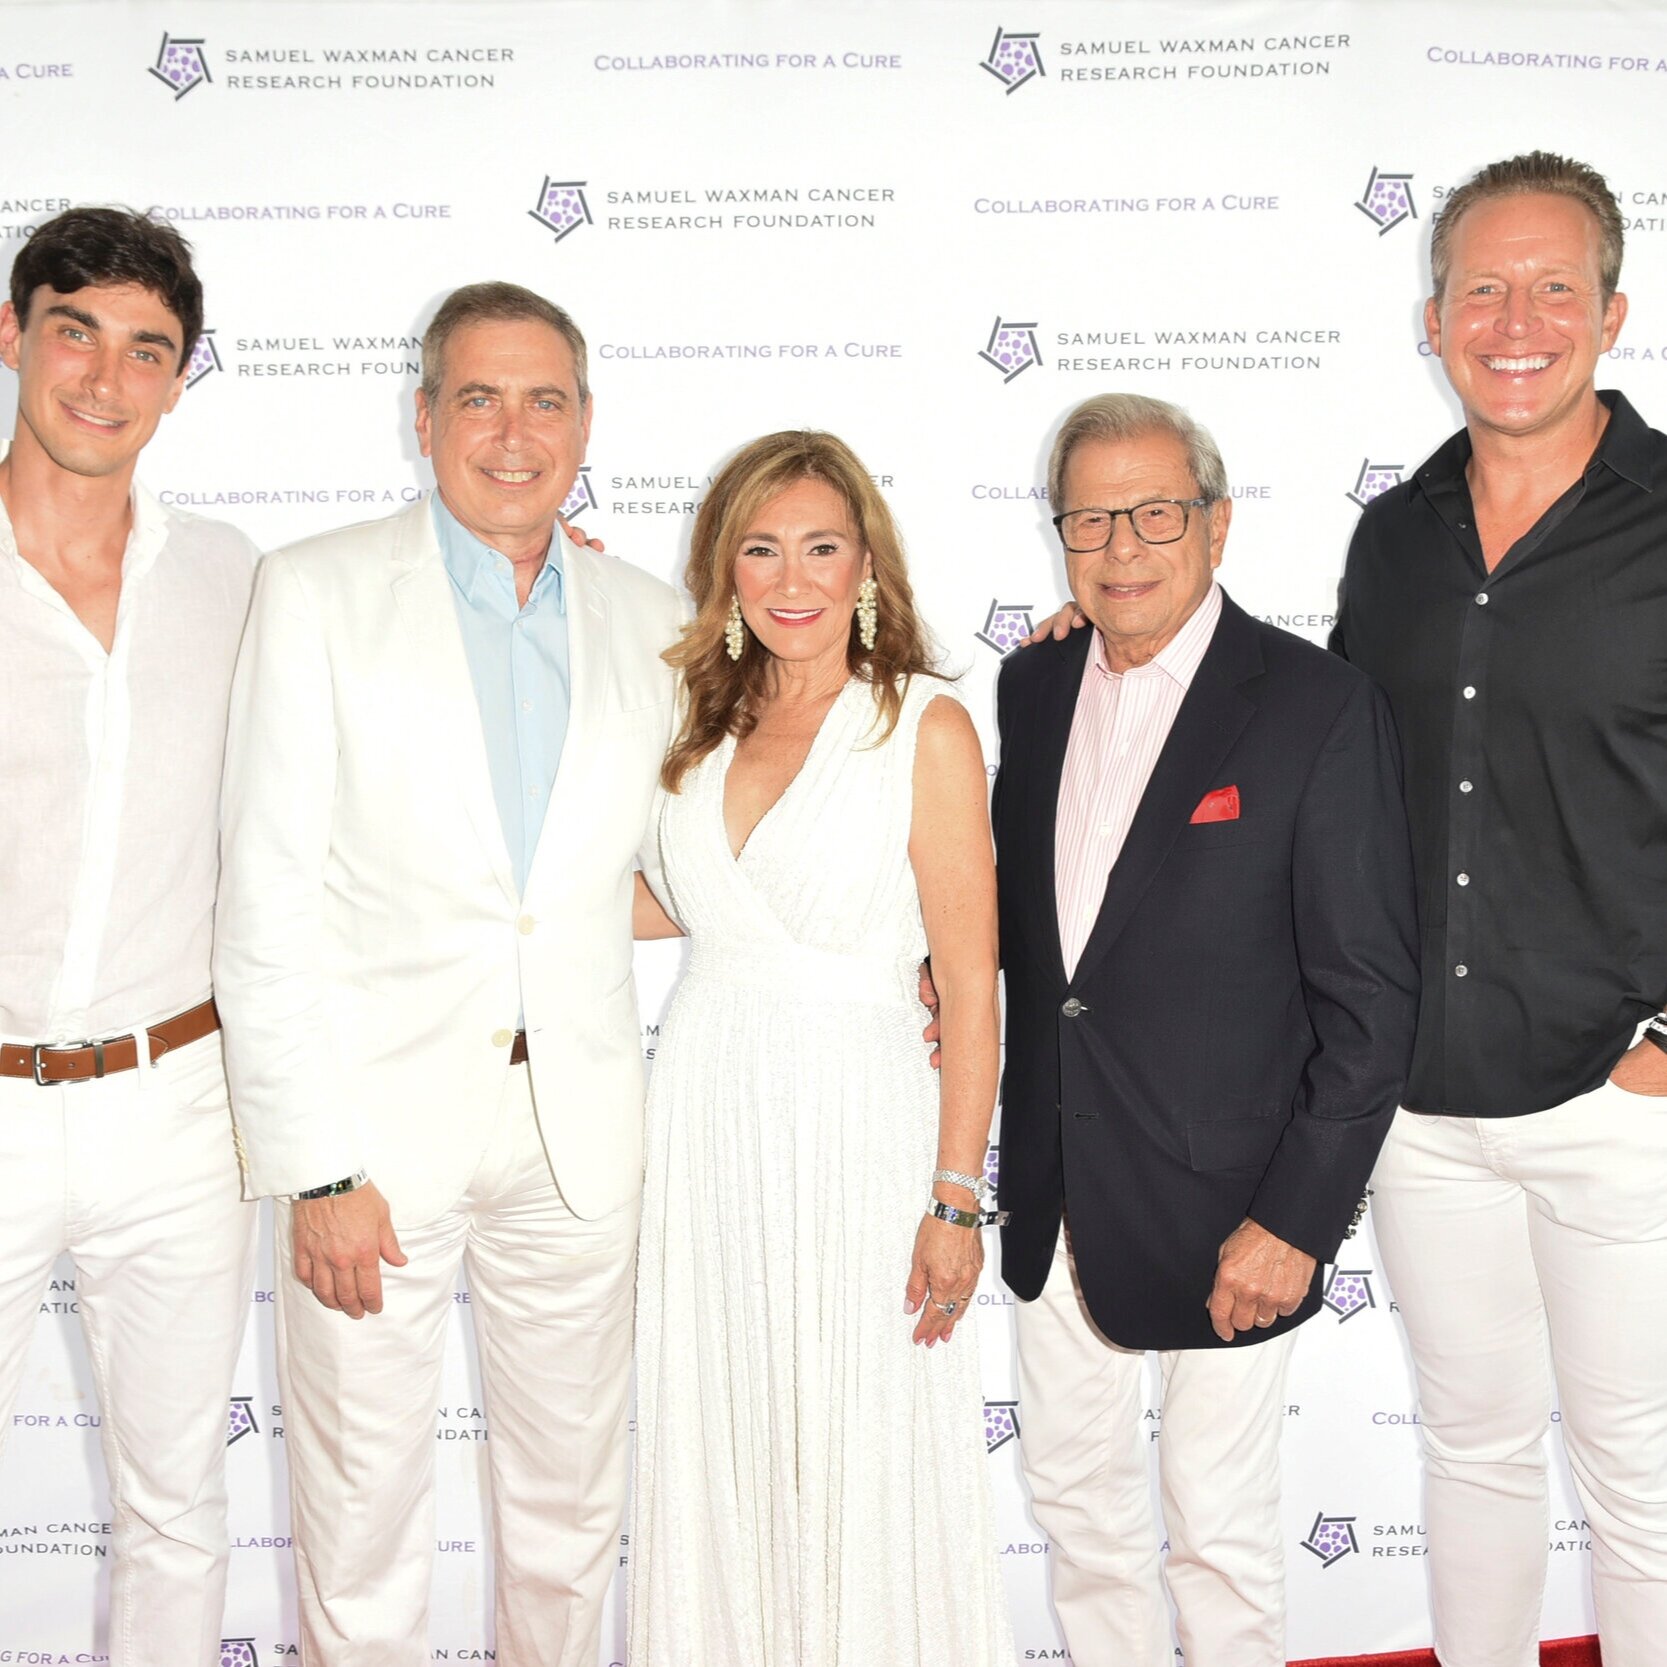 Samuel Waxman Cancer Research Foundation Collaborating For A Cure